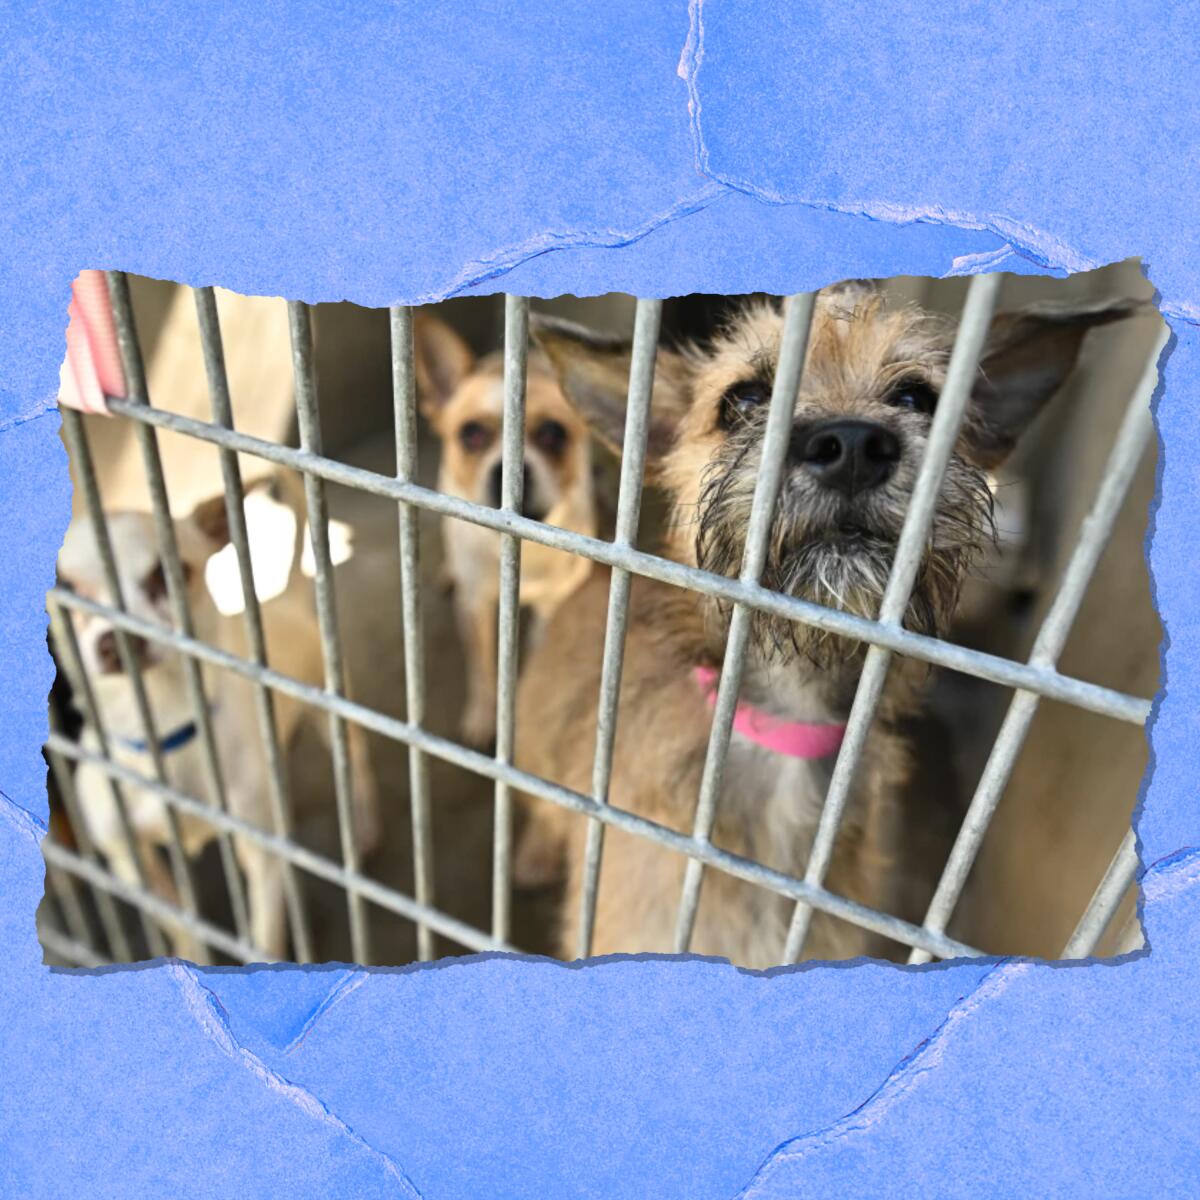 Several dogs look through a cage.